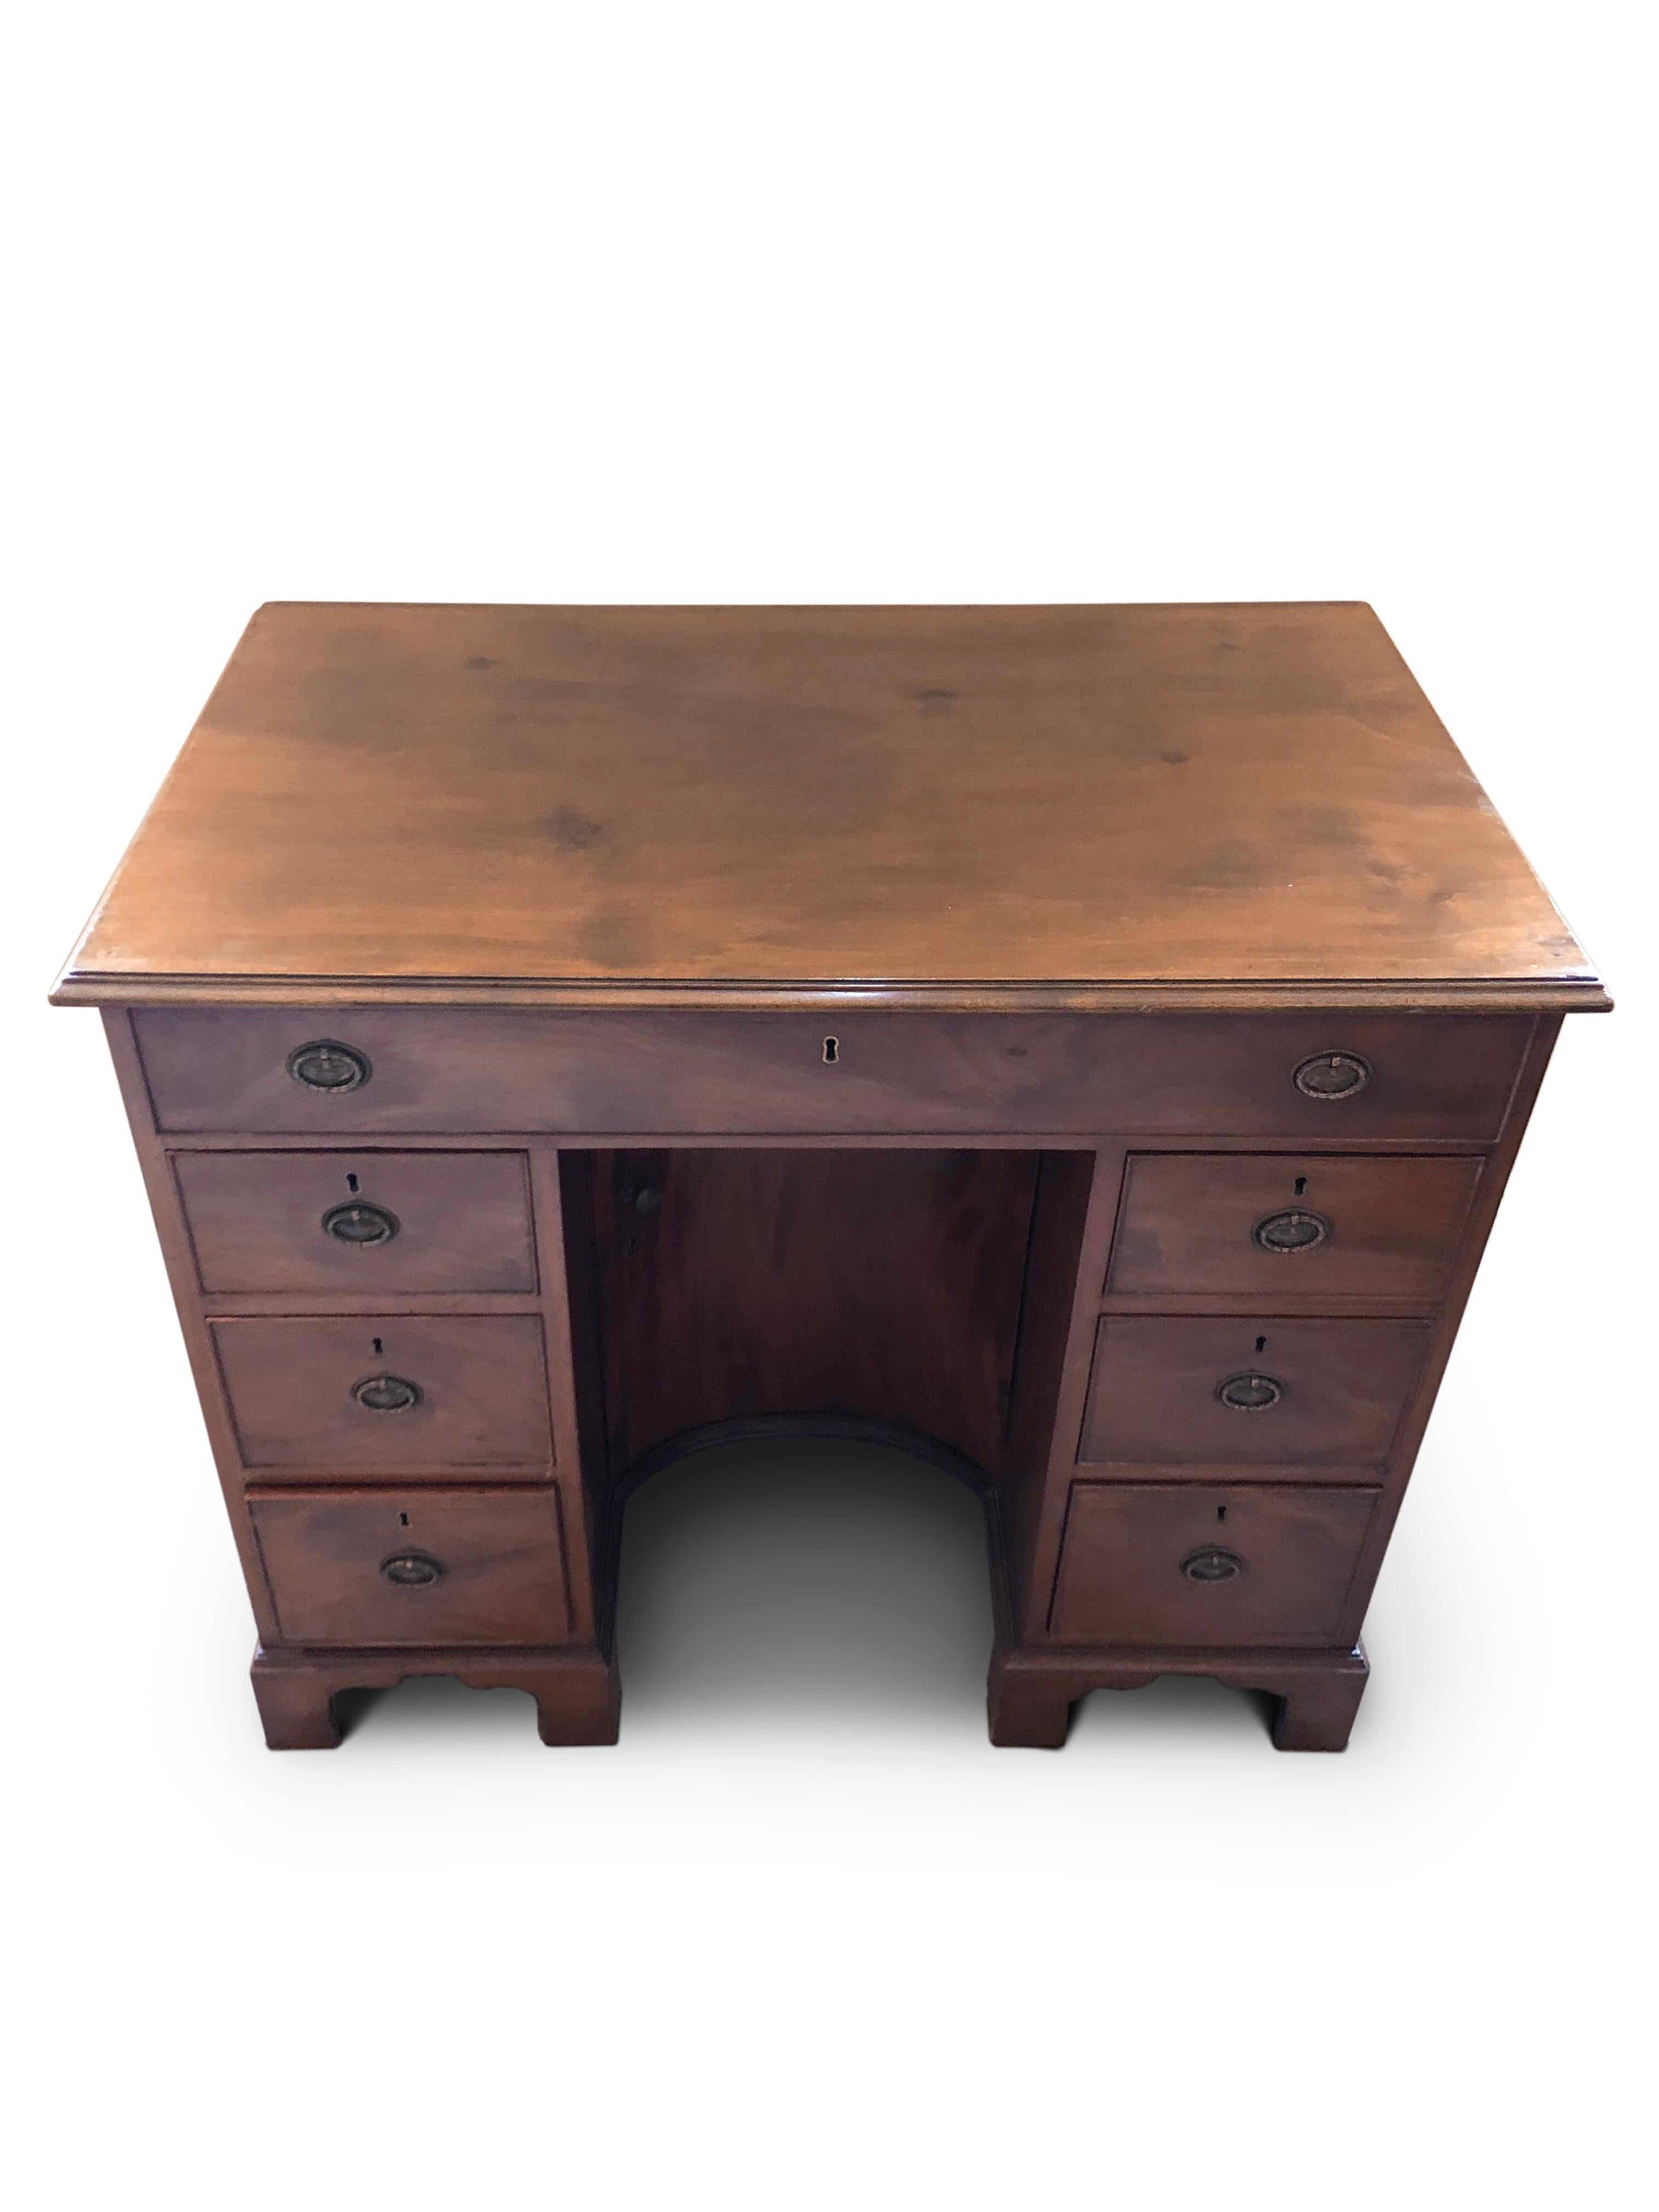 George III mahogany kneehole desk.
Thumbnail edged top, with large drawer beneath. Central 'Concave' shaped Cupboard flanked by three drawers either side. All resting on small bracket feet.